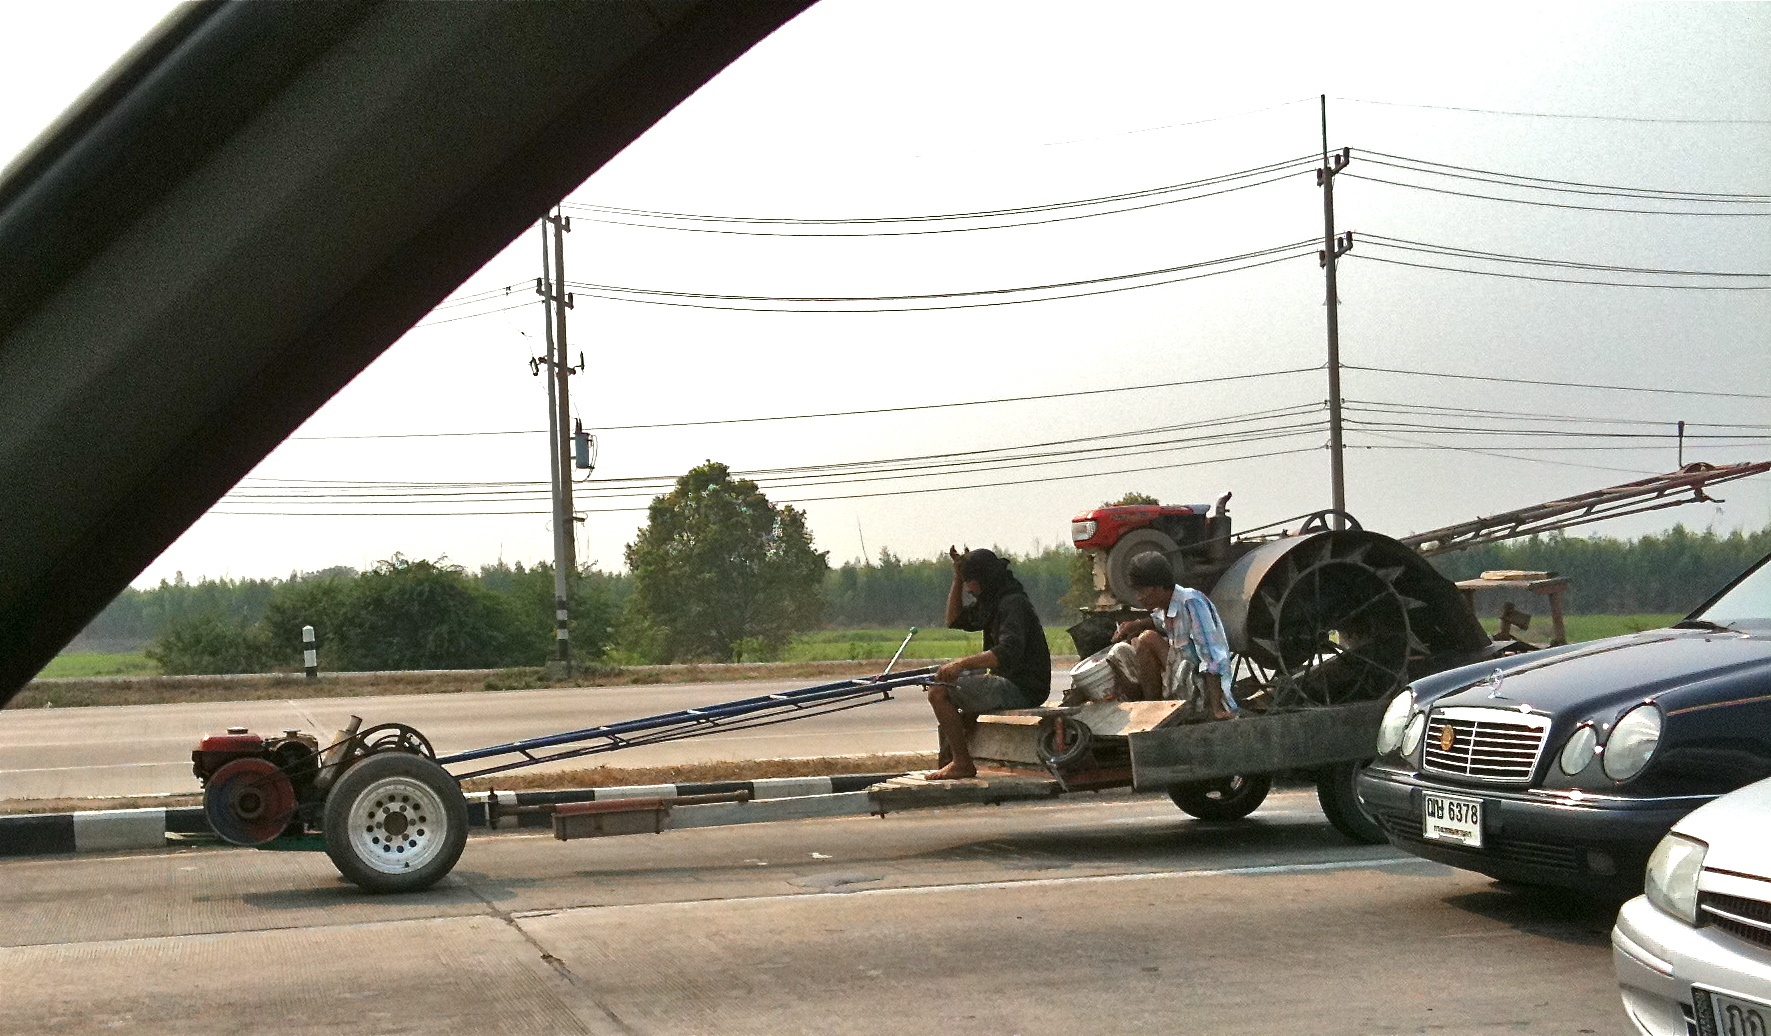 there is a car pulling a trailer on a flatbed